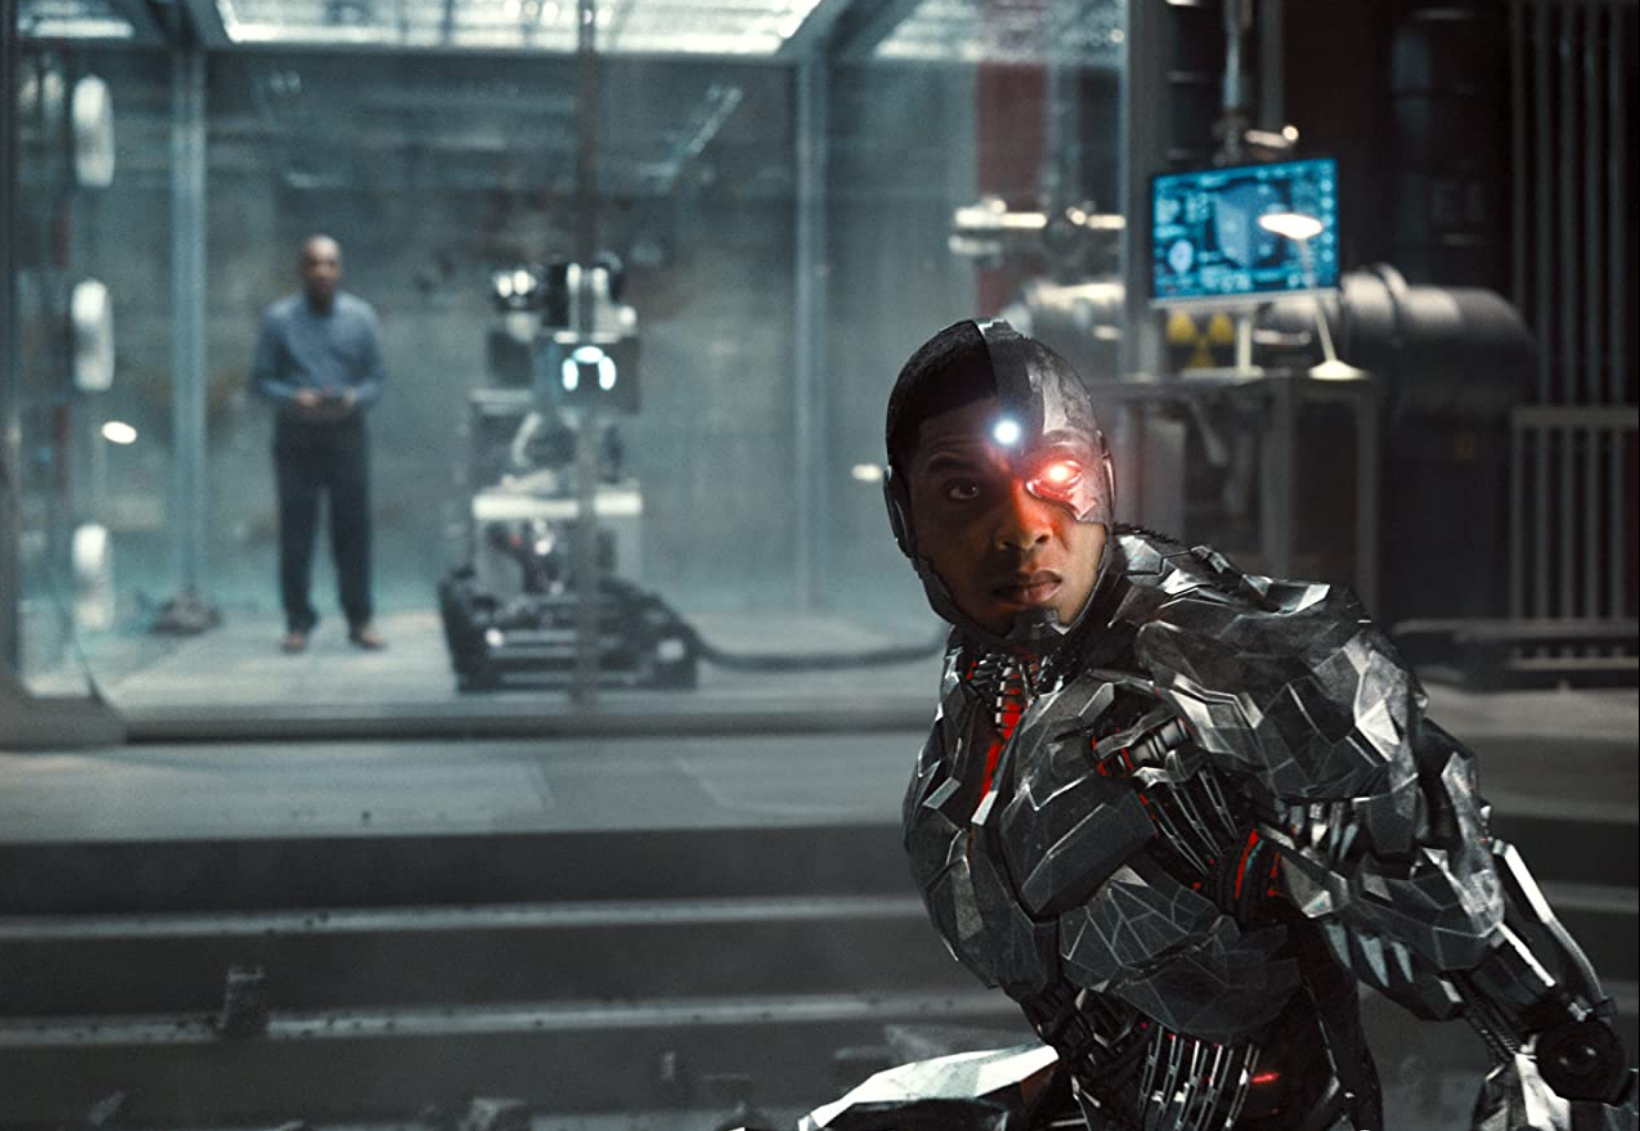 Ray Fisher's performance as Cyborg is one of the main highlights of the film.